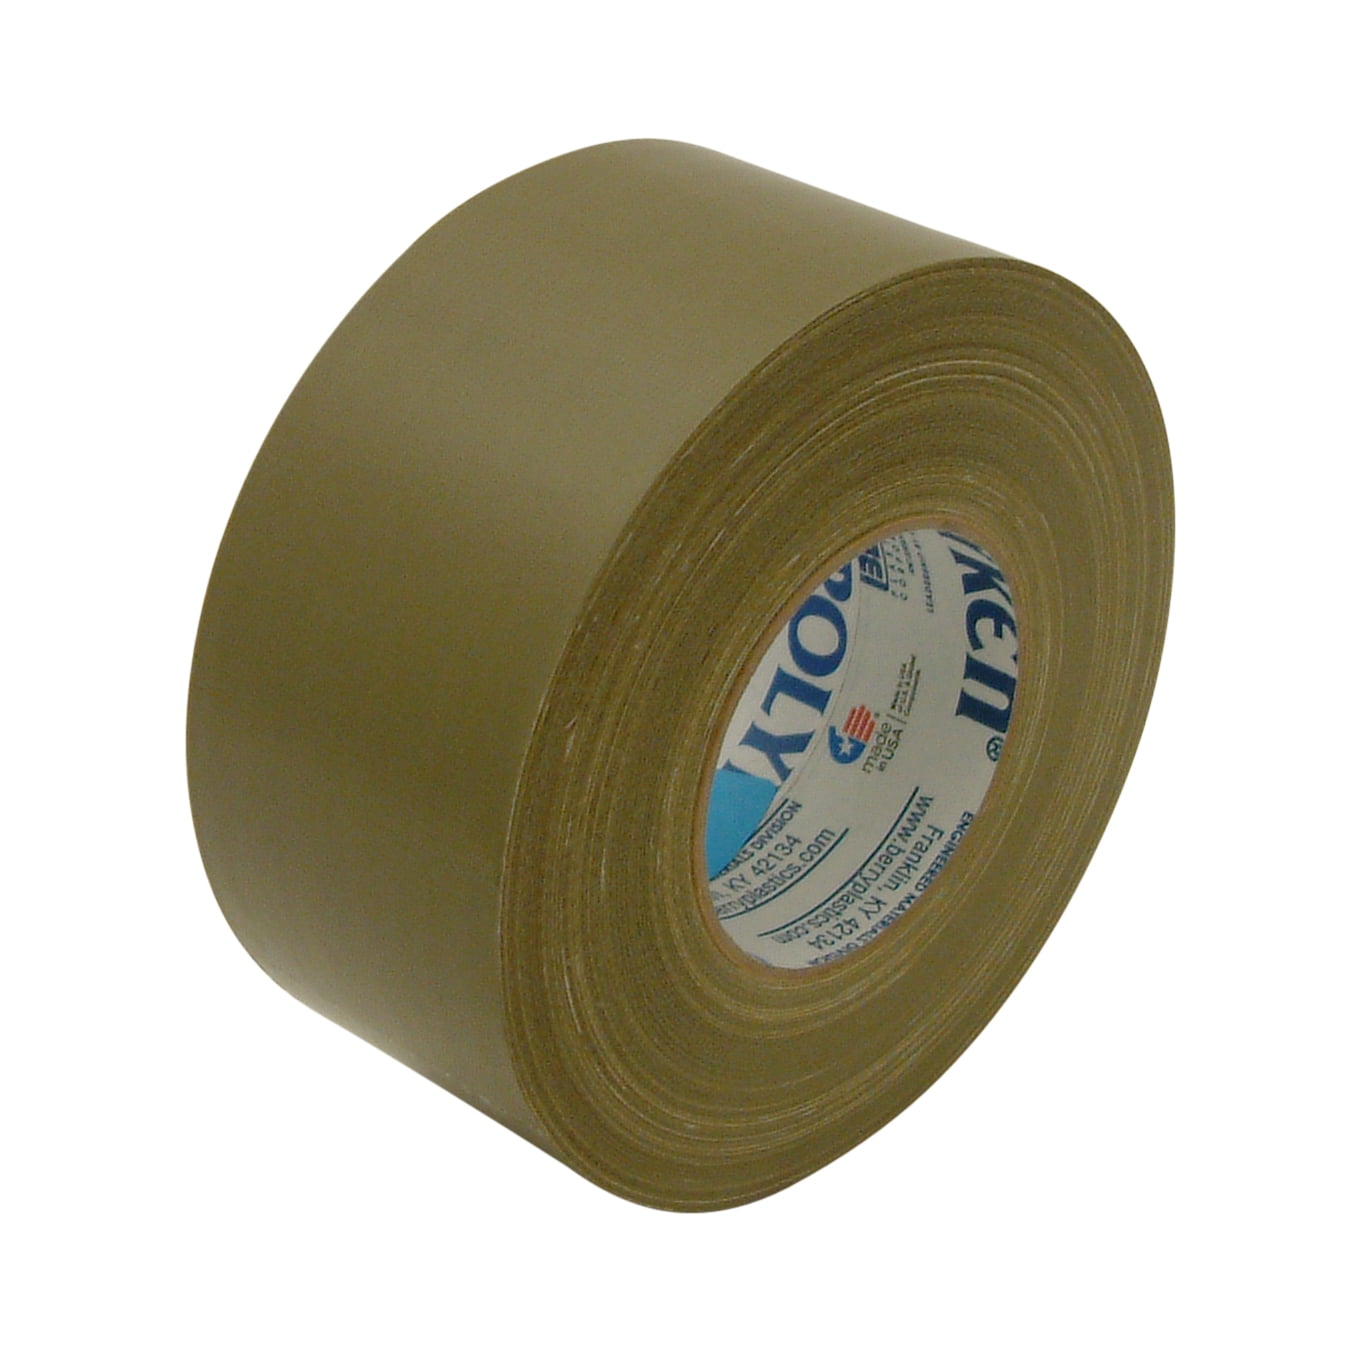  WOD DTC12 Contractor Grade Olive Drab Duct Tape 12 Mil, 2 inch  x 60 yds. Waterproof, UV Resistant for Crafts & Home Improvement :  Industrial & Scientific